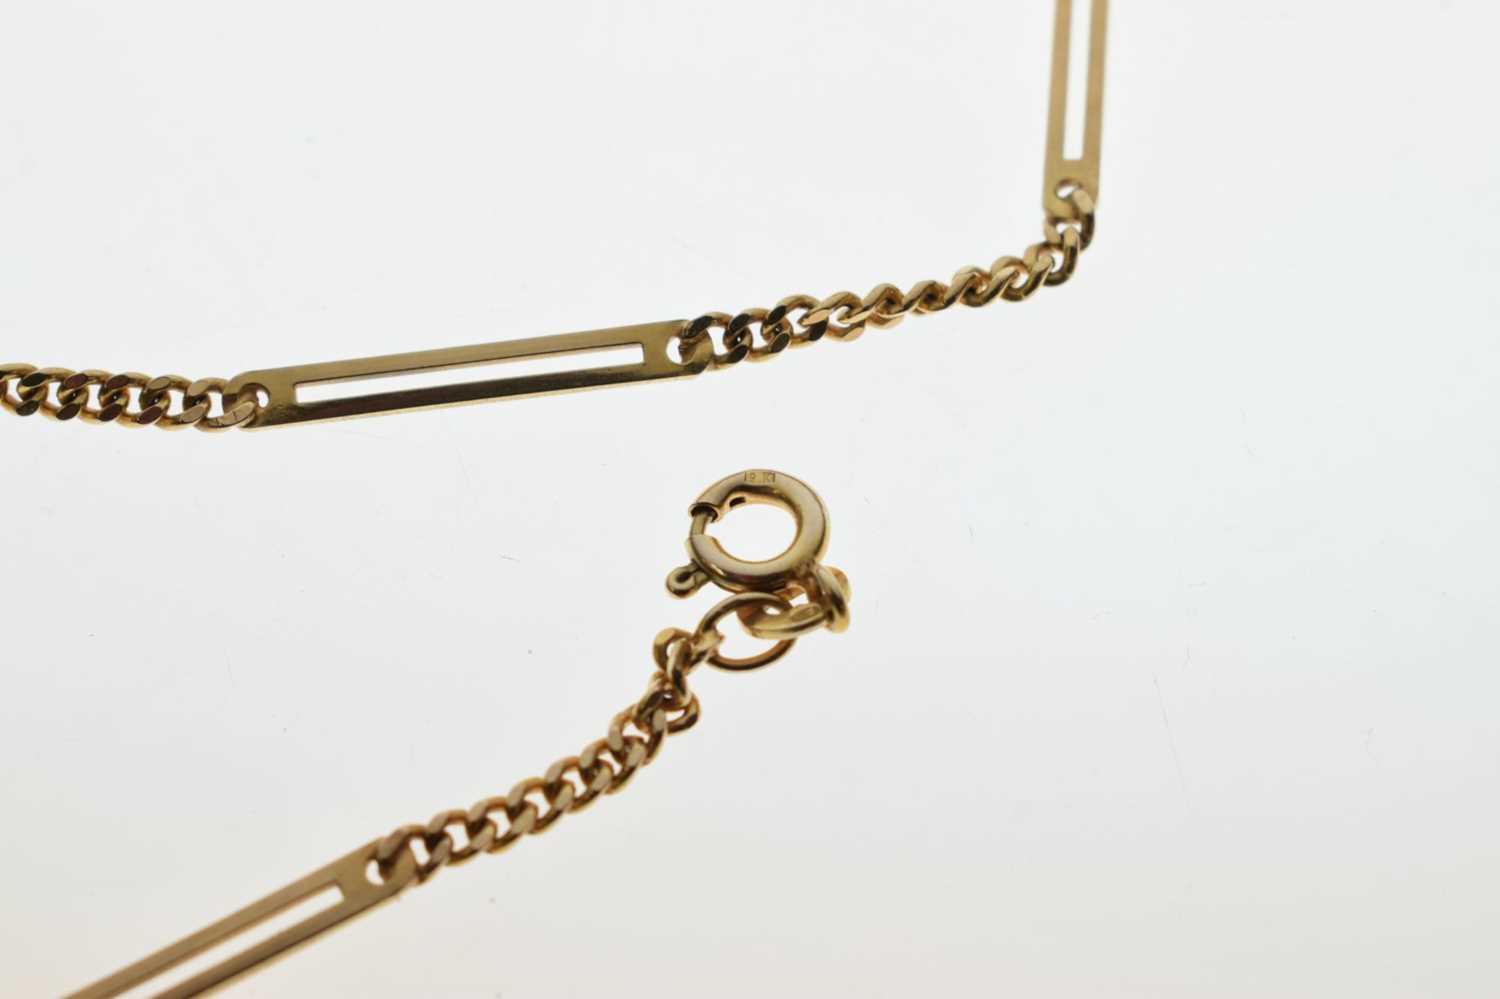 9ct gold trombone link necklace - Image 5 of 6